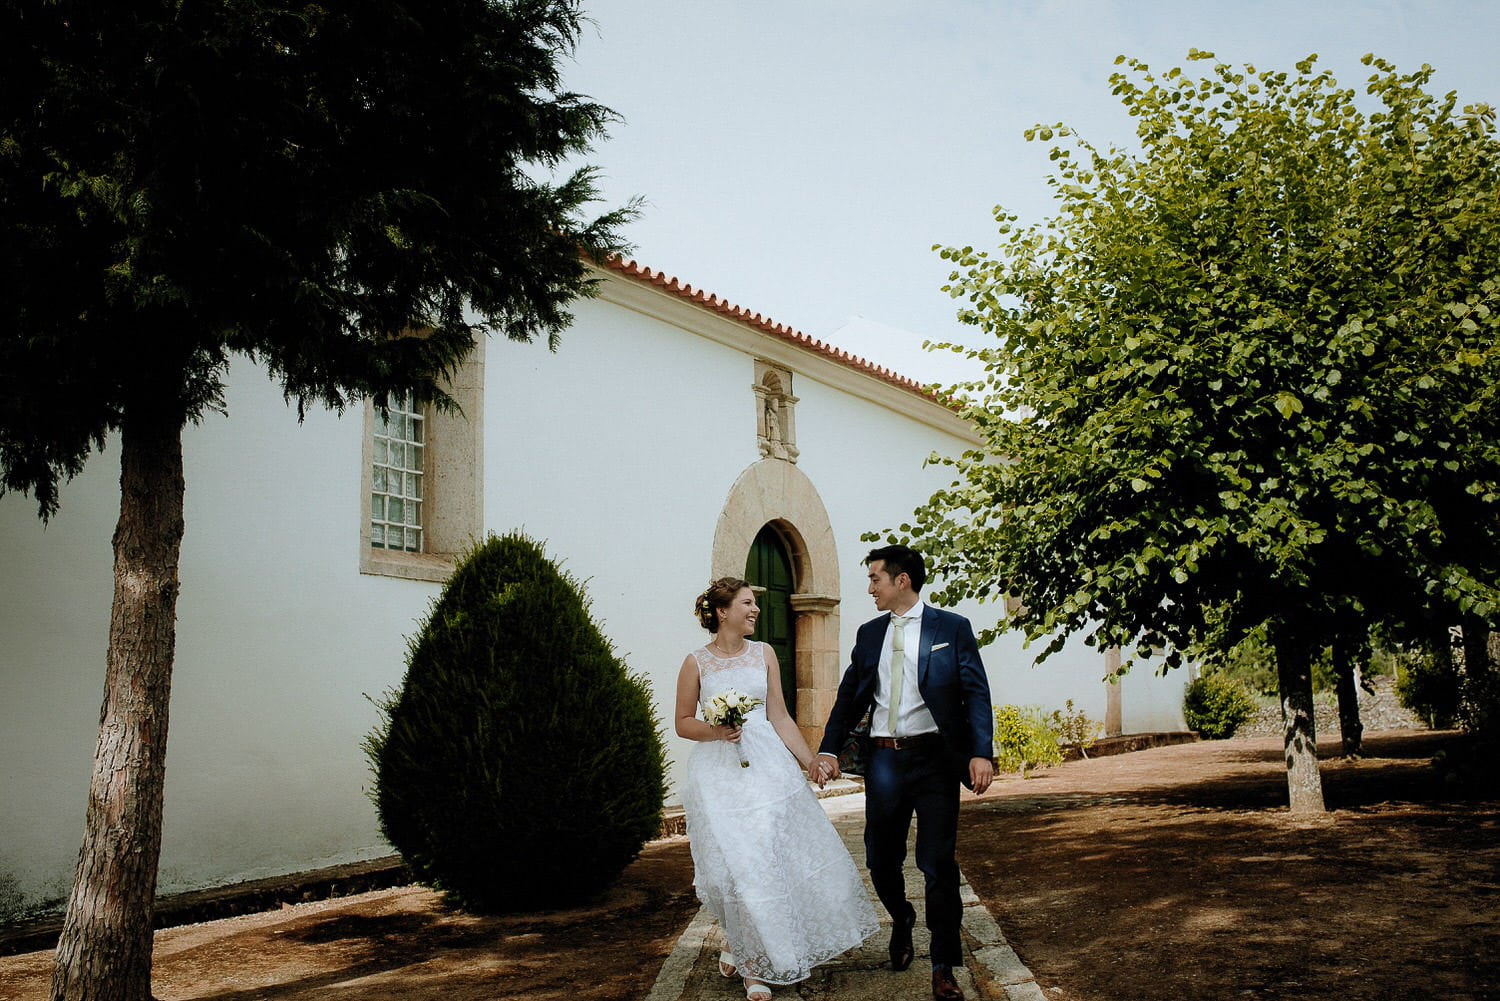 Charming Destination Wedding in the Portuguese Countryside - bride and groom just married walking down from church